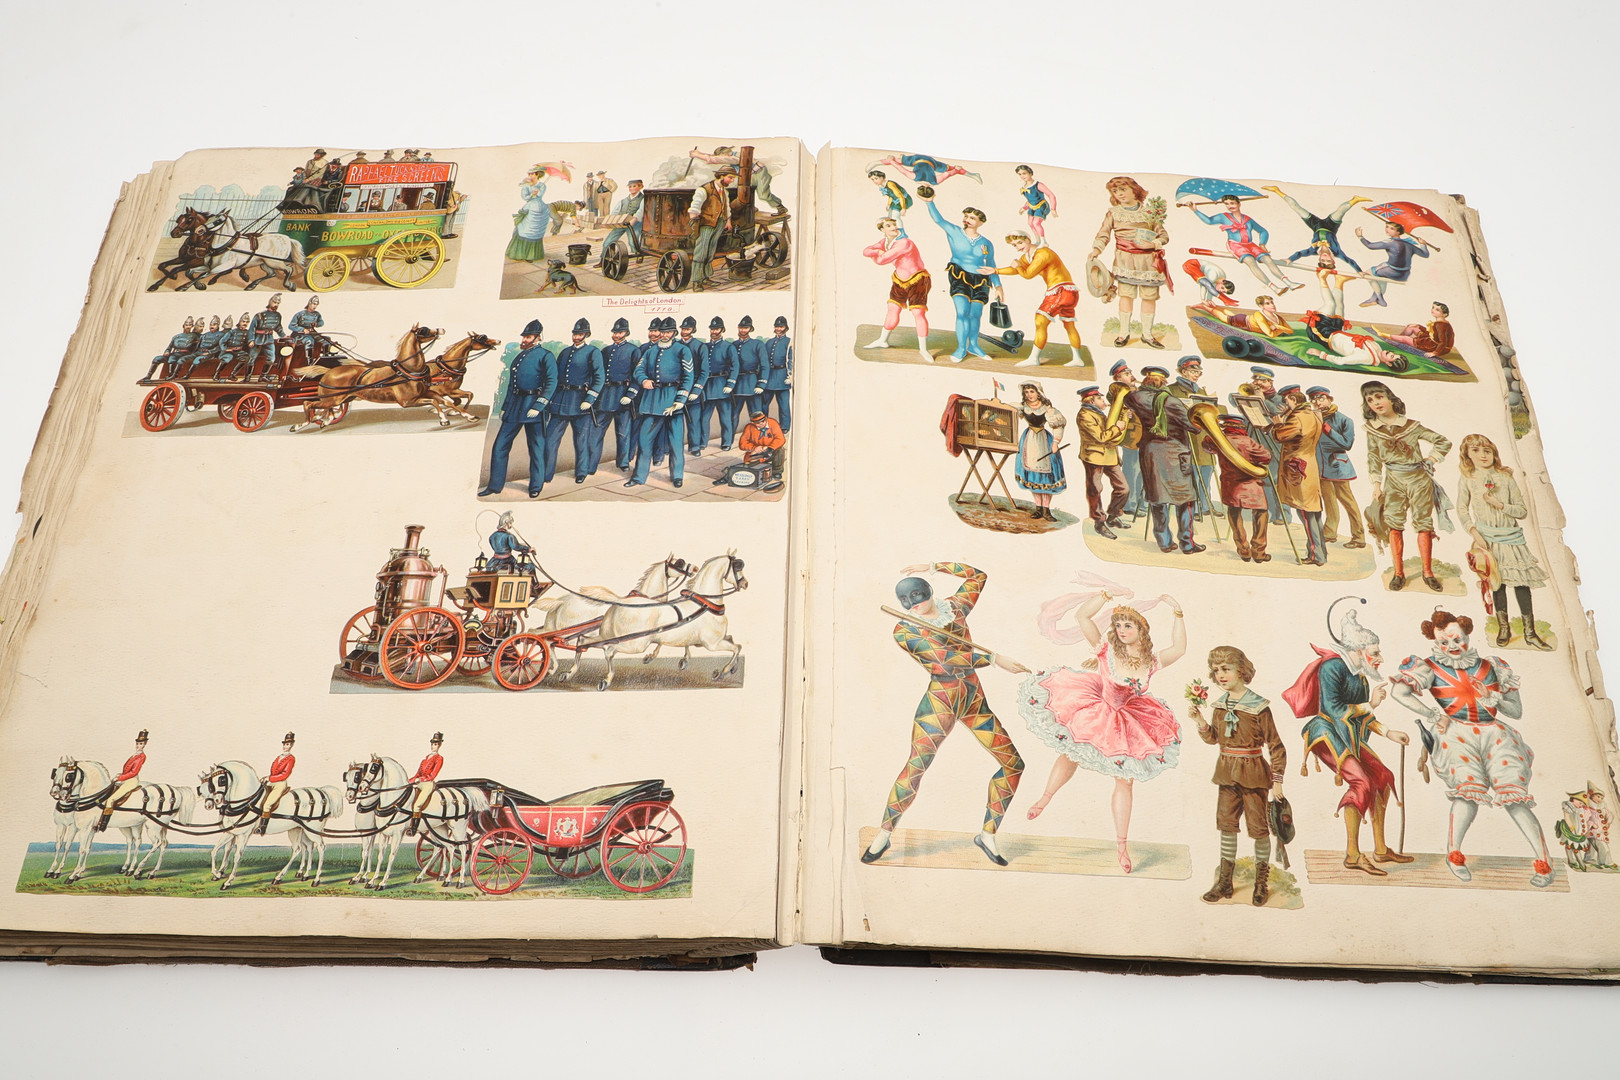 LARGE EARLY 20THC SCRAP BOOK - INCLUDING THE NORTH POLE. - Image 7 of 25